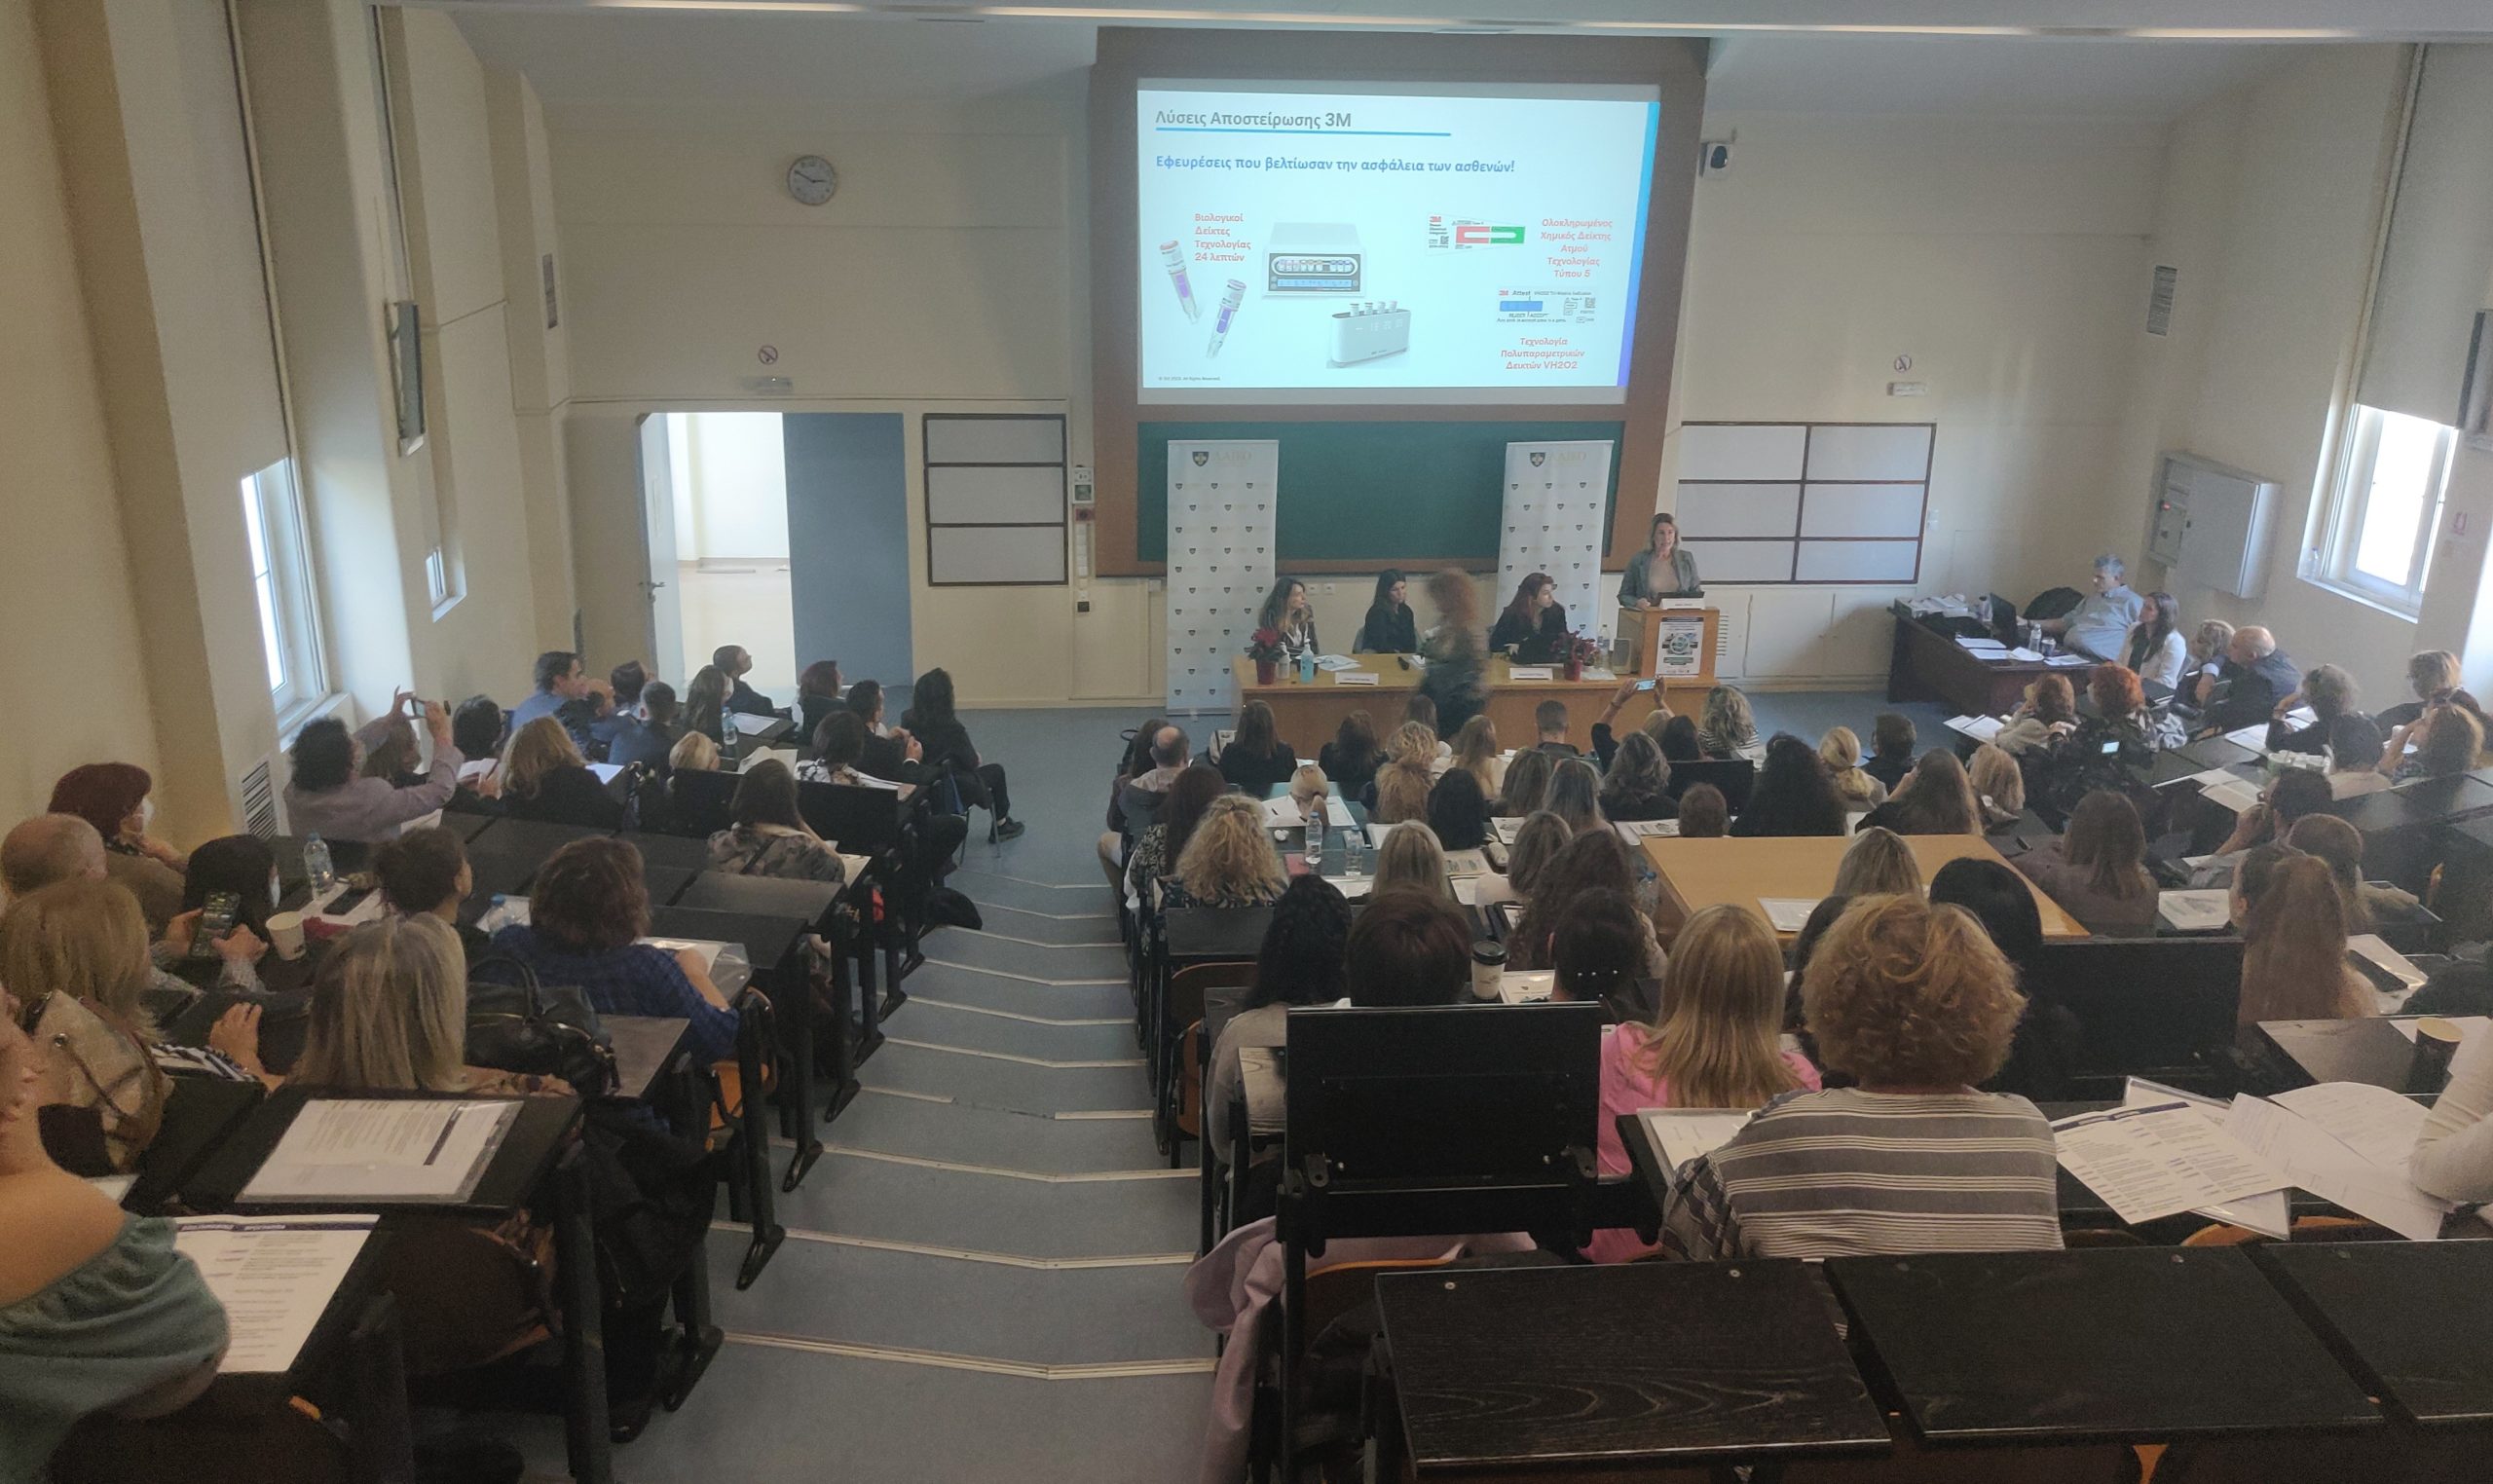 Y-Logimed, official distributor of 3Μ Medical Solutions in the Public Hospitals of Greece, actively participated in the Two-Day Event on C.S.S.D., titled “Standardization & Digitalization in C.S.S.D. in the battle against infections: Crisis? Time for Distinction!” which took place in LAIKO General Hospital of Athens on November 18-19.